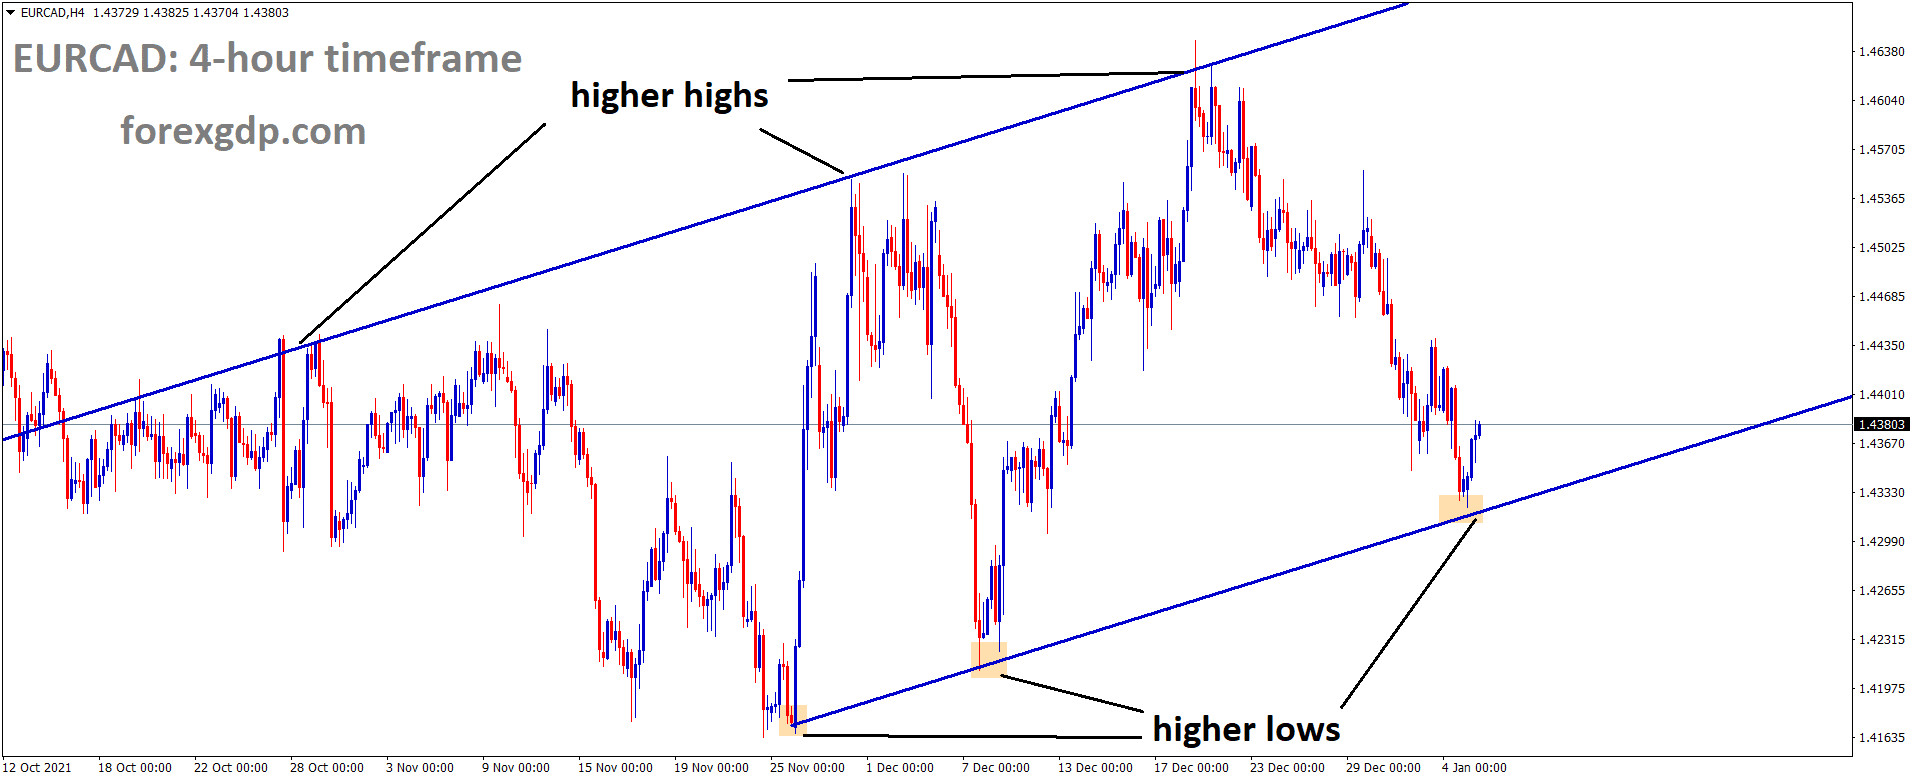 EURCAD is moving in an Ascending channel and the market has rebounded from the higher low area of the channel 1